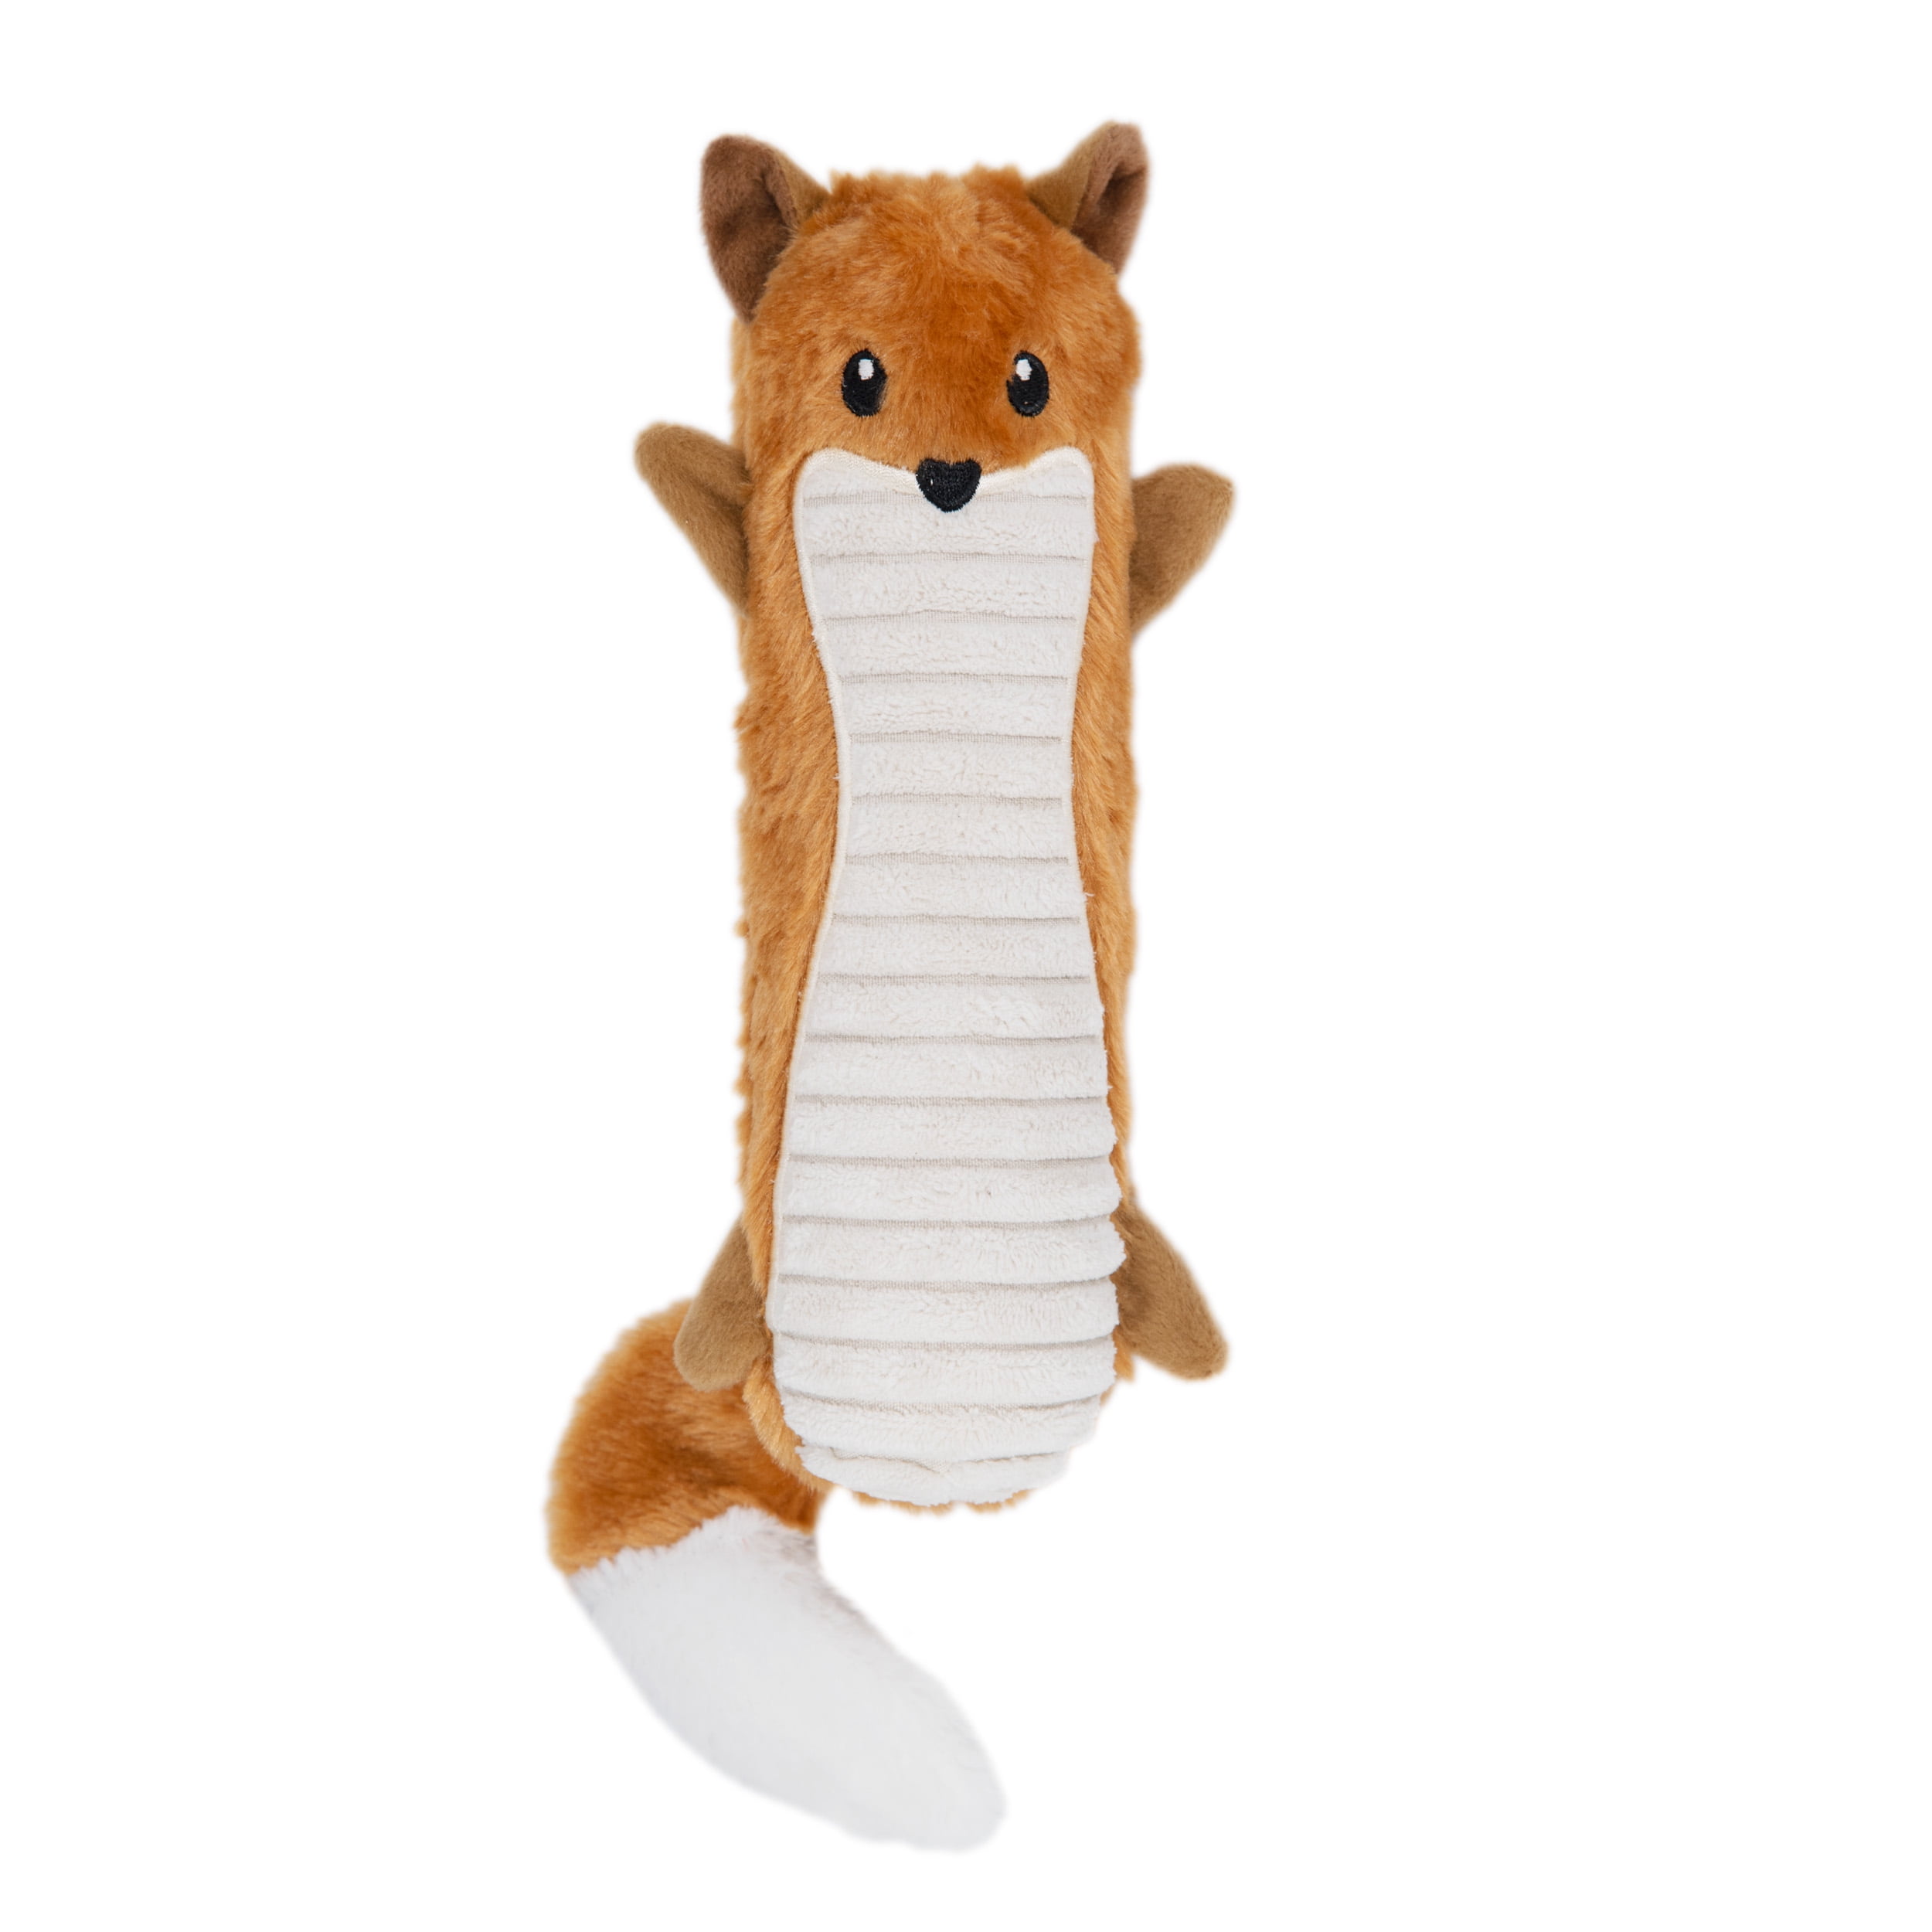 FGA MARKETPLACE Monkey-Fox Flat NO Stuffing NO Squeak Plush Dog Toy, Funny  Style Will Entertain Your Dog for Hours, Recommended for Small and Medium